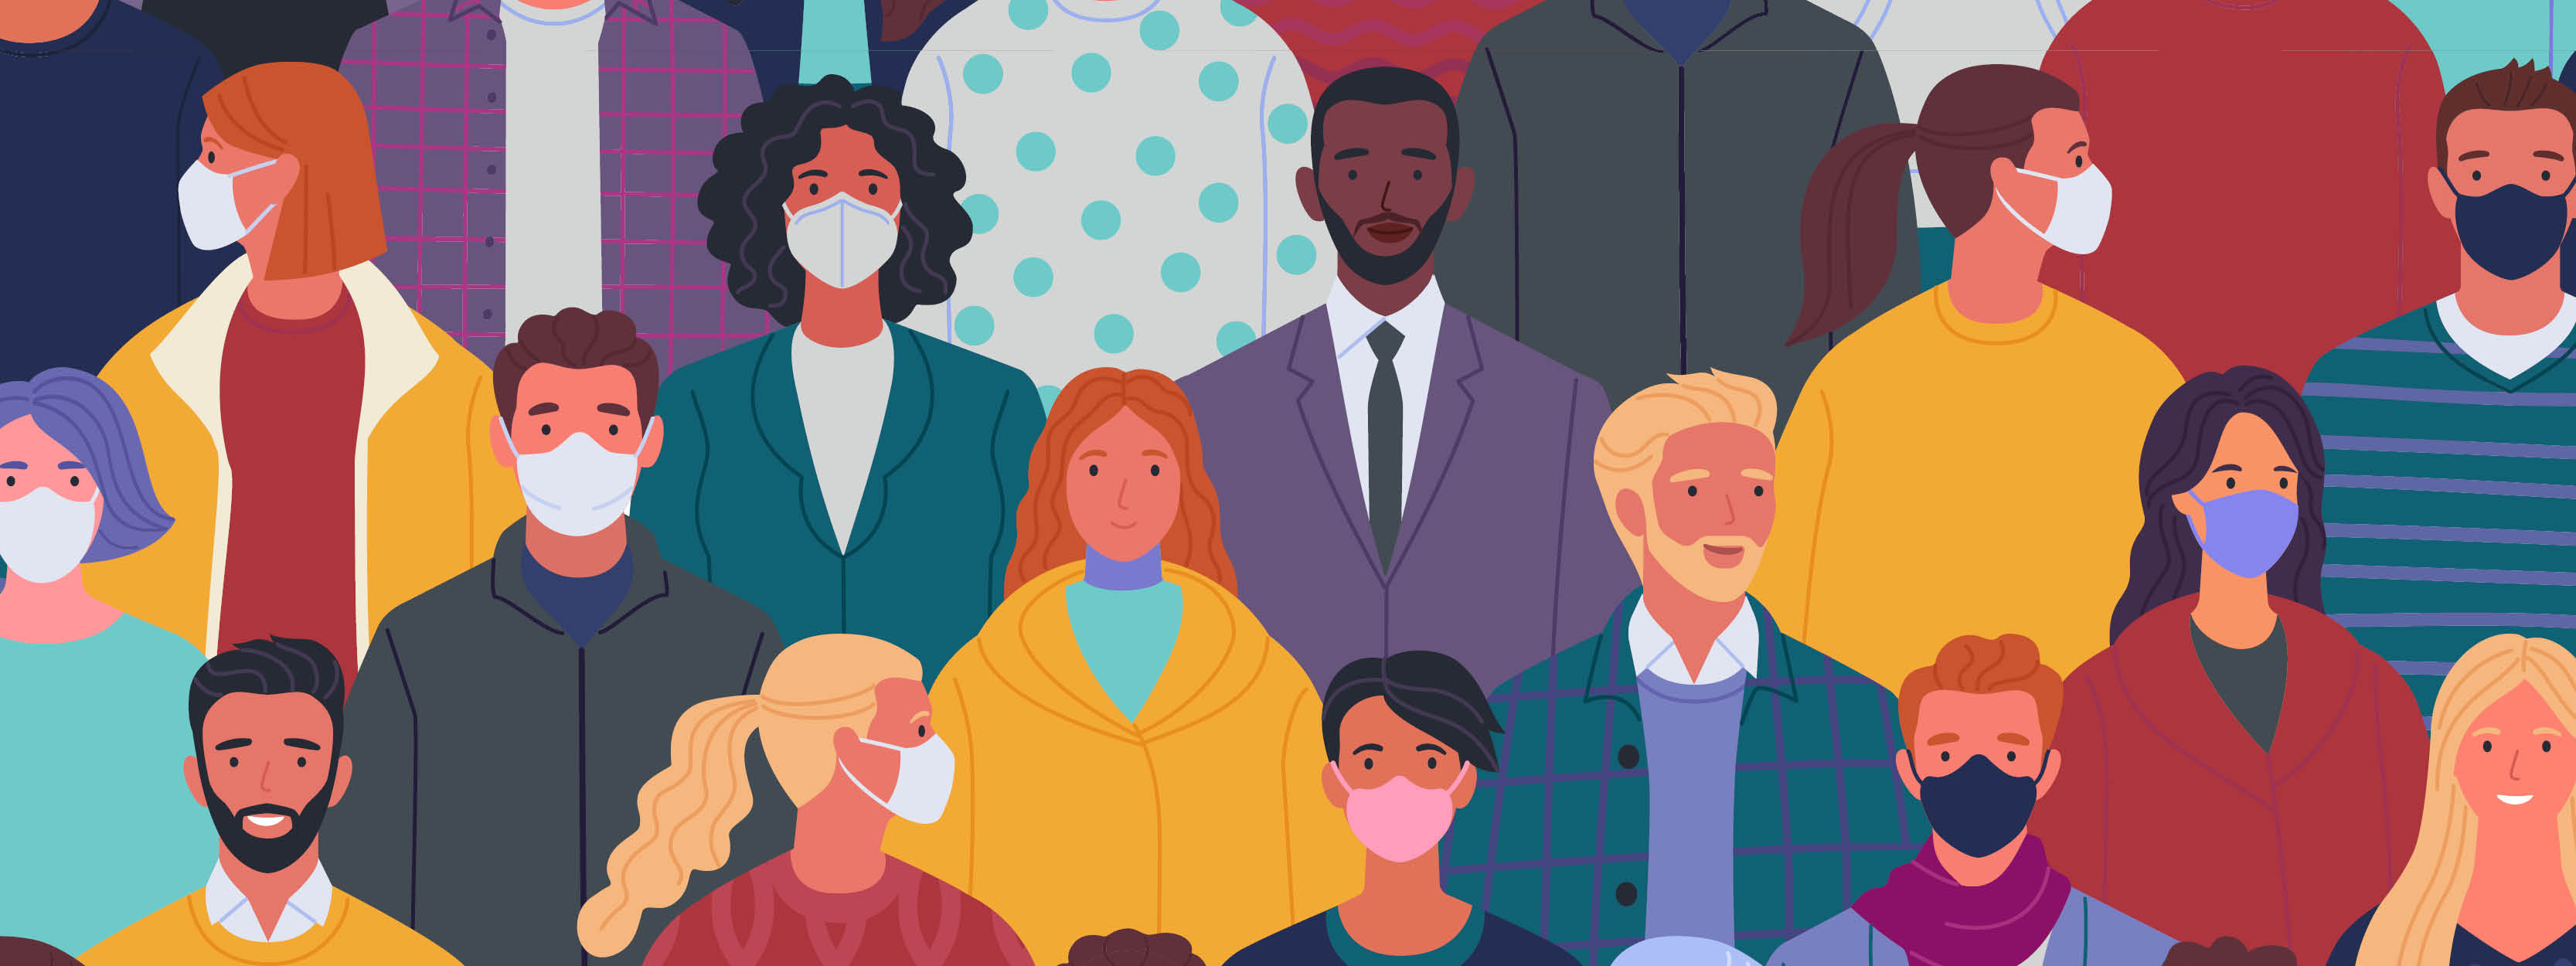 Illustration of a diverse group of people, some wearing masks